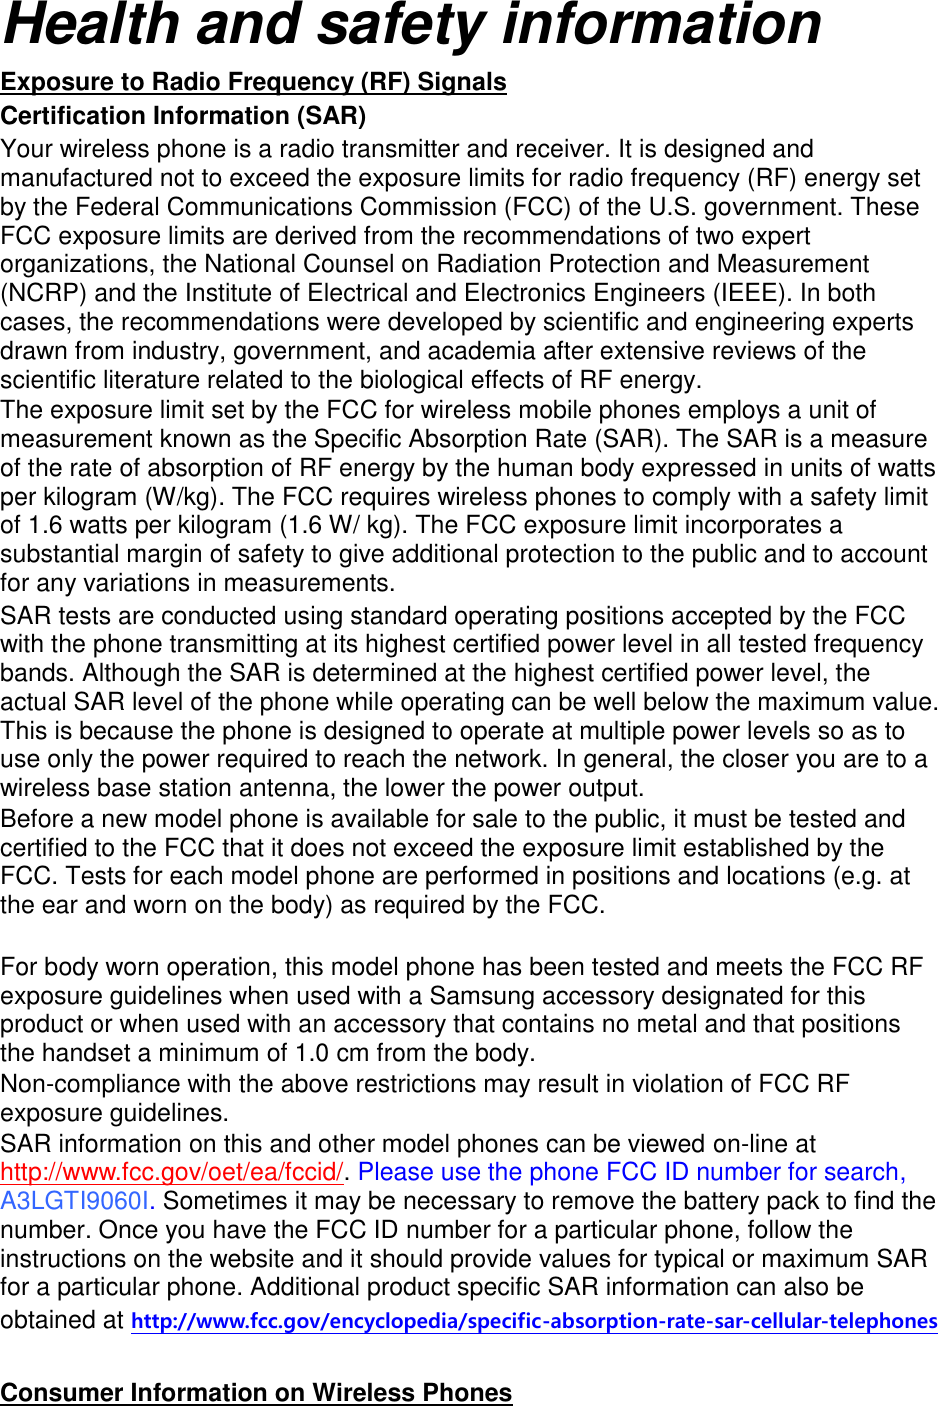 Health and safety information Exposure to Radio Frequency (RF) Signals Certification Information (SAR) Your wireless phone is a radio transmitter and receiver. It is designed and manufactured not to exceed the exposure limits for radio frequency (RF) energy set by the Federal Communications Commission (FCC) of the U.S. government. These FCC exposure limits are derived from the recommendations of two expert organizations, the National Counsel on Radiation Protection and Measurement (NCRP) and the Institute of Electrical and Electronics Engineers (IEEE). In both cases, the recommendations were developed by scientific and engineering experts drawn from industry, government, and academia after extensive reviews of the scientific literature related to the biological effects of RF energy. The exposure limit set by the FCC for wireless mobile phones employs a unit of measurement known as the Specific Absorption Rate (SAR). The SAR is a measure of the rate of absorption of RF energy by the human body expressed in units of watts per kilogram (W/kg). The FCC requires wireless phones to comply with a safety limit of 1.6 watts per kilogram (1.6 W/ kg). The FCC exposure limit incorporates a substantial margin of safety to give additional protection to the public and to account for any variations in measurements. SAR tests are conducted using standard operating positions accepted by the FCC with the phone transmitting at its highest certified power level in all tested frequency bands. Although the SAR is determined at the highest certified power level, the actual SAR level of the phone while operating can be well below the maximum value. This is because the phone is designed to operate at multiple power levels so as to use only the power required to reach the network. In general, the closer you are to a wireless base station antenna, the lower the power output. Before a new model phone is available for sale to the public, it must be tested and certified to the FCC that it does not exceed the exposure limit established by the FCC. Tests for each model phone are performed in positions and locations (e.g. at the ear and worn on the body) as required by the FCC.      For body worn operation, this model phone has been tested and meets the FCC RF exposure guidelines when used with a Samsung accessory designated for this product or when used with an accessory that contains no metal and that positions the handset a minimum of 1.0 cm from the body.   Non-compliance with the above restrictions may result in violation of FCC RF exposure guidelines. SAR information on this and other model phones can be viewed on-line at http://www.fcc.gov/oet/ea/fccid/. Please use the phone FCC ID number for search, A3LGTI9060I. Sometimes it may be necessary to remove the battery pack to find the number. Once you have the FCC ID number for a particular phone, follow the instructions on the website and it should provide values for typical or maximum SAR for a particular phone. Additional product specific SAR information can also be obtained at http://www.fcc.gov/encyclopedia/specific-absorption-rate-sar-cellular-telephones  Consumer Information on Wireless Phones 